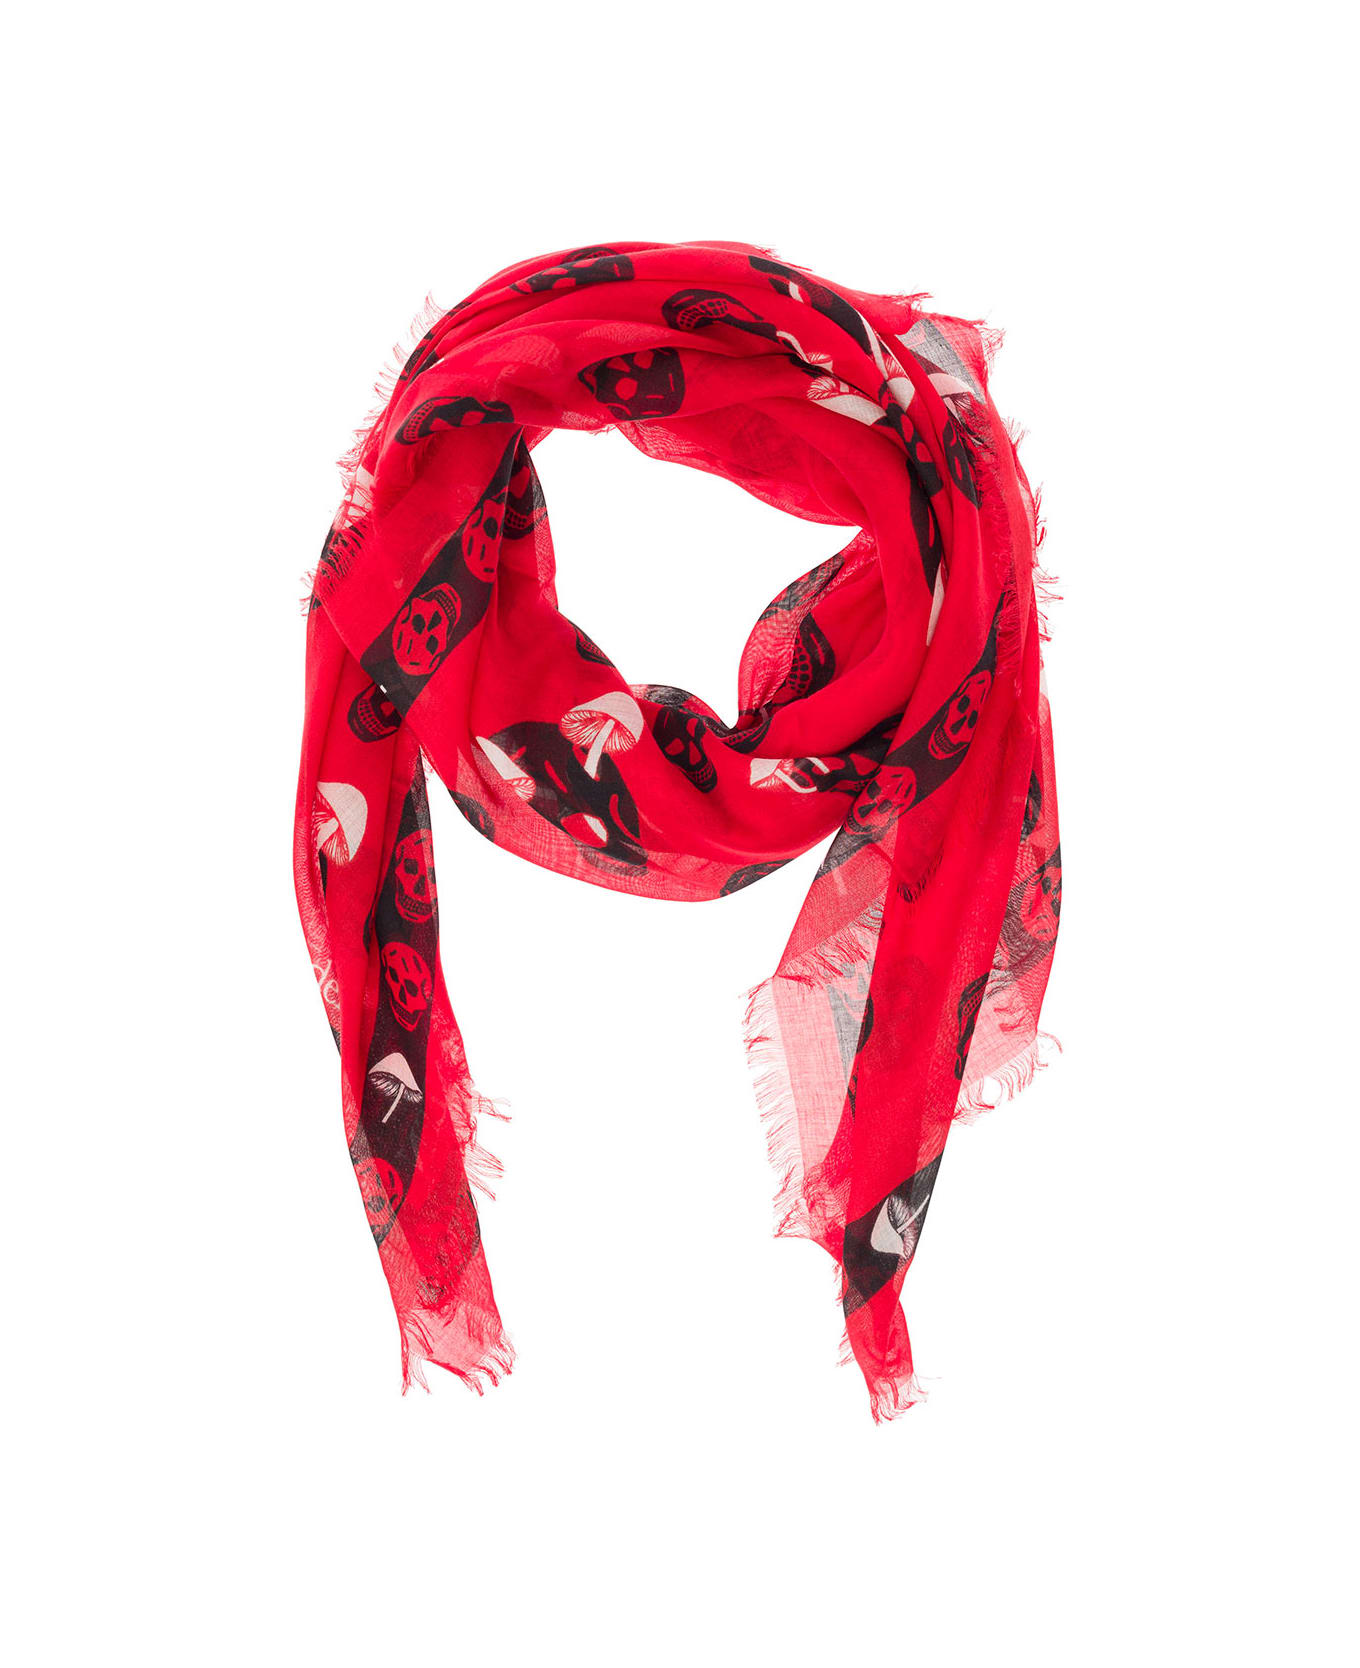 Alexander McQueen Red Scarf With Skull And Mushroom Print All-over In Modal Blend - Red